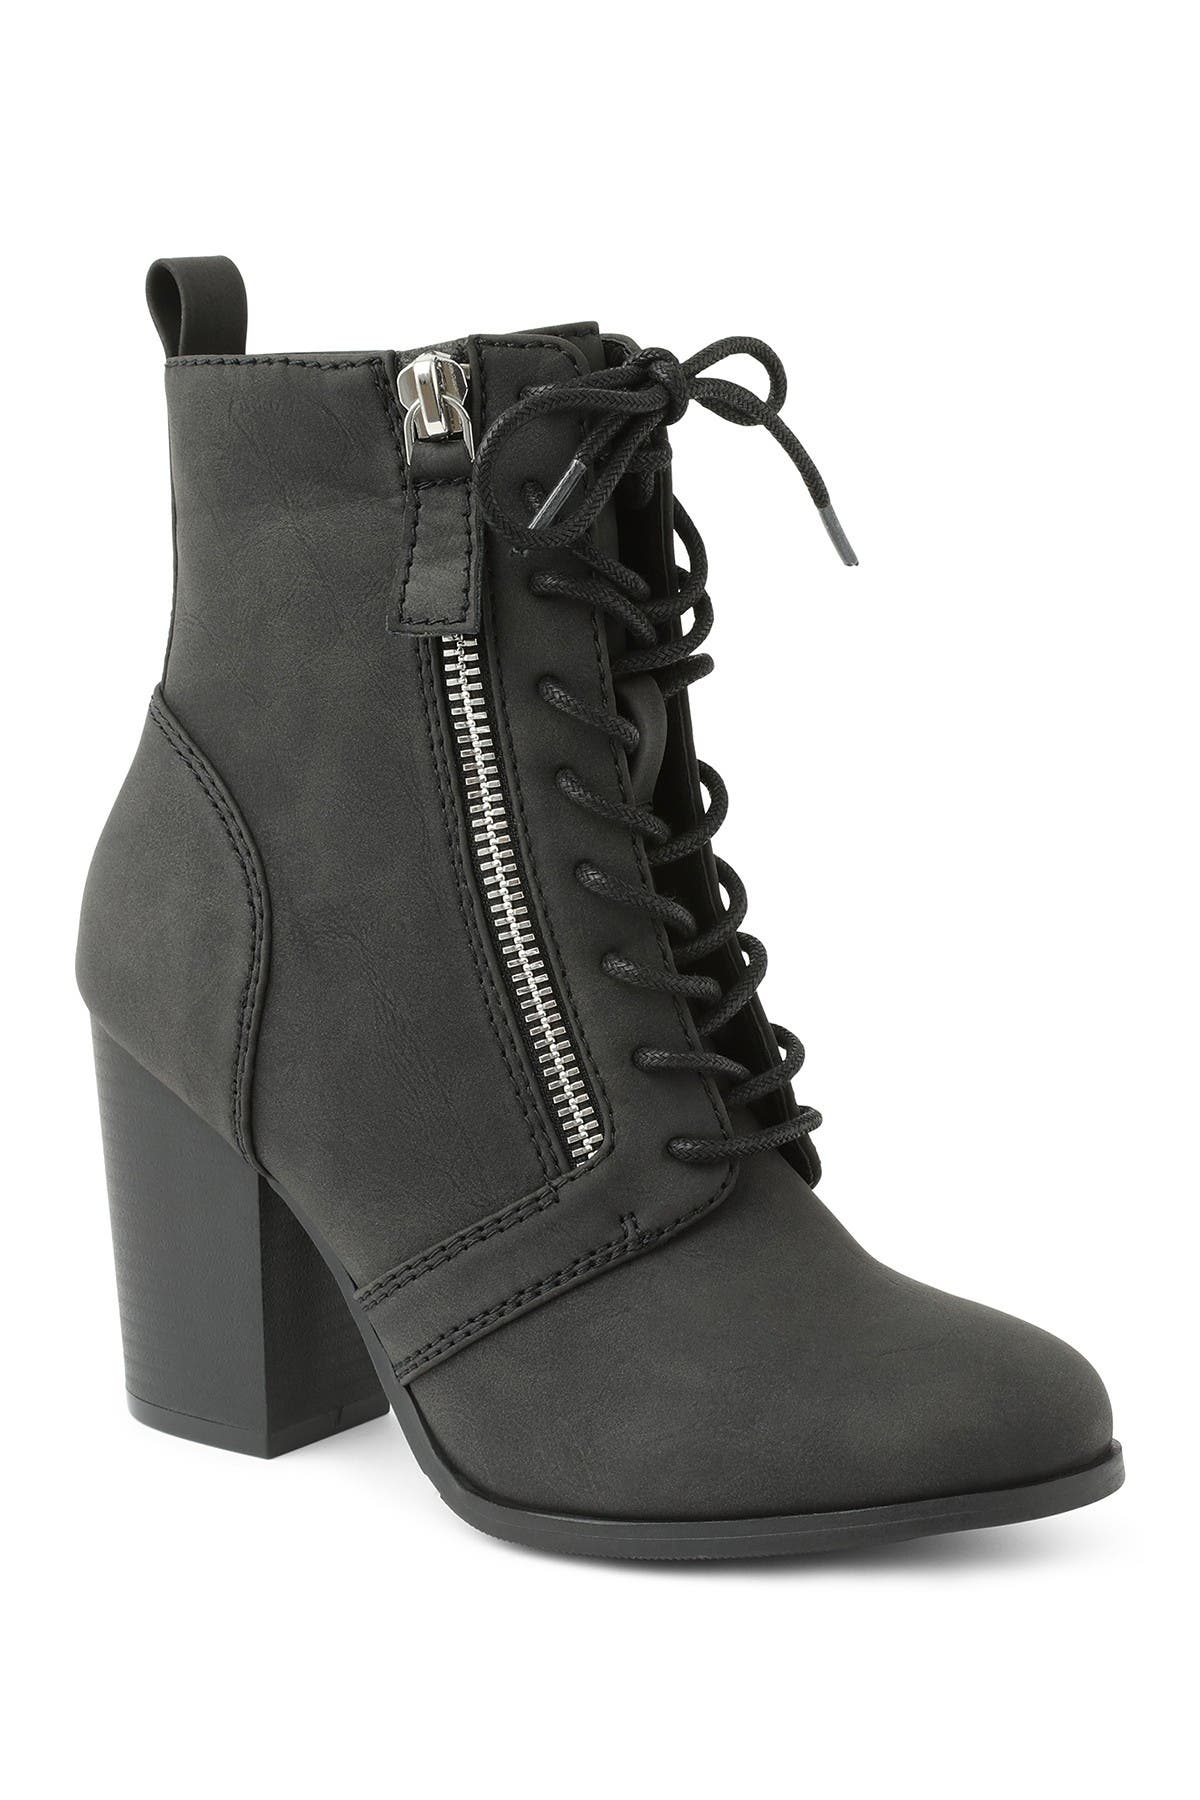 xoxo boots lace up